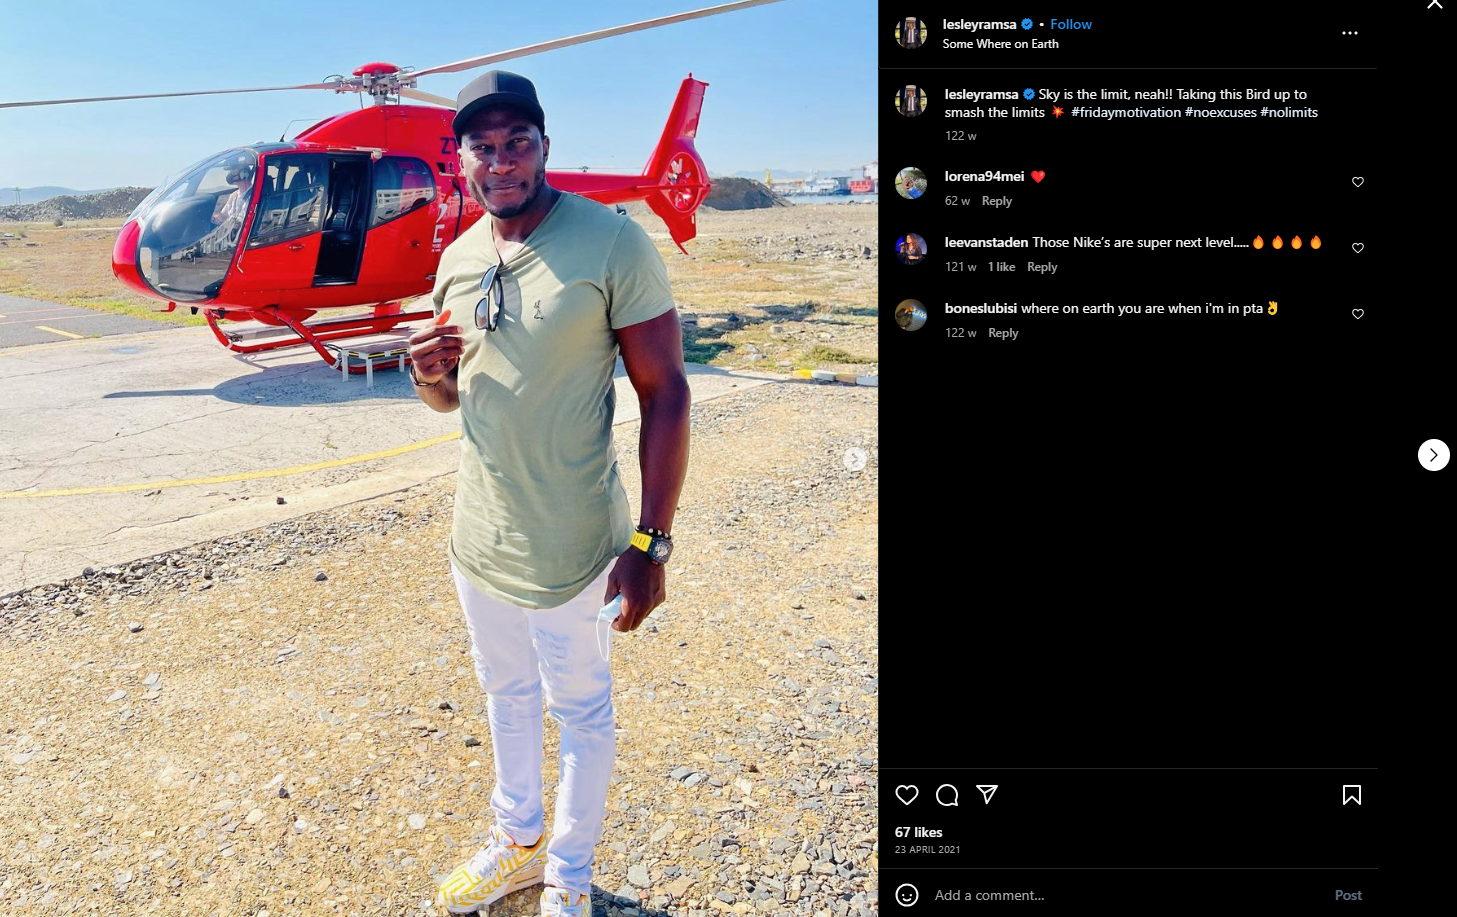 Lesley Ramulifho beside a helicopter